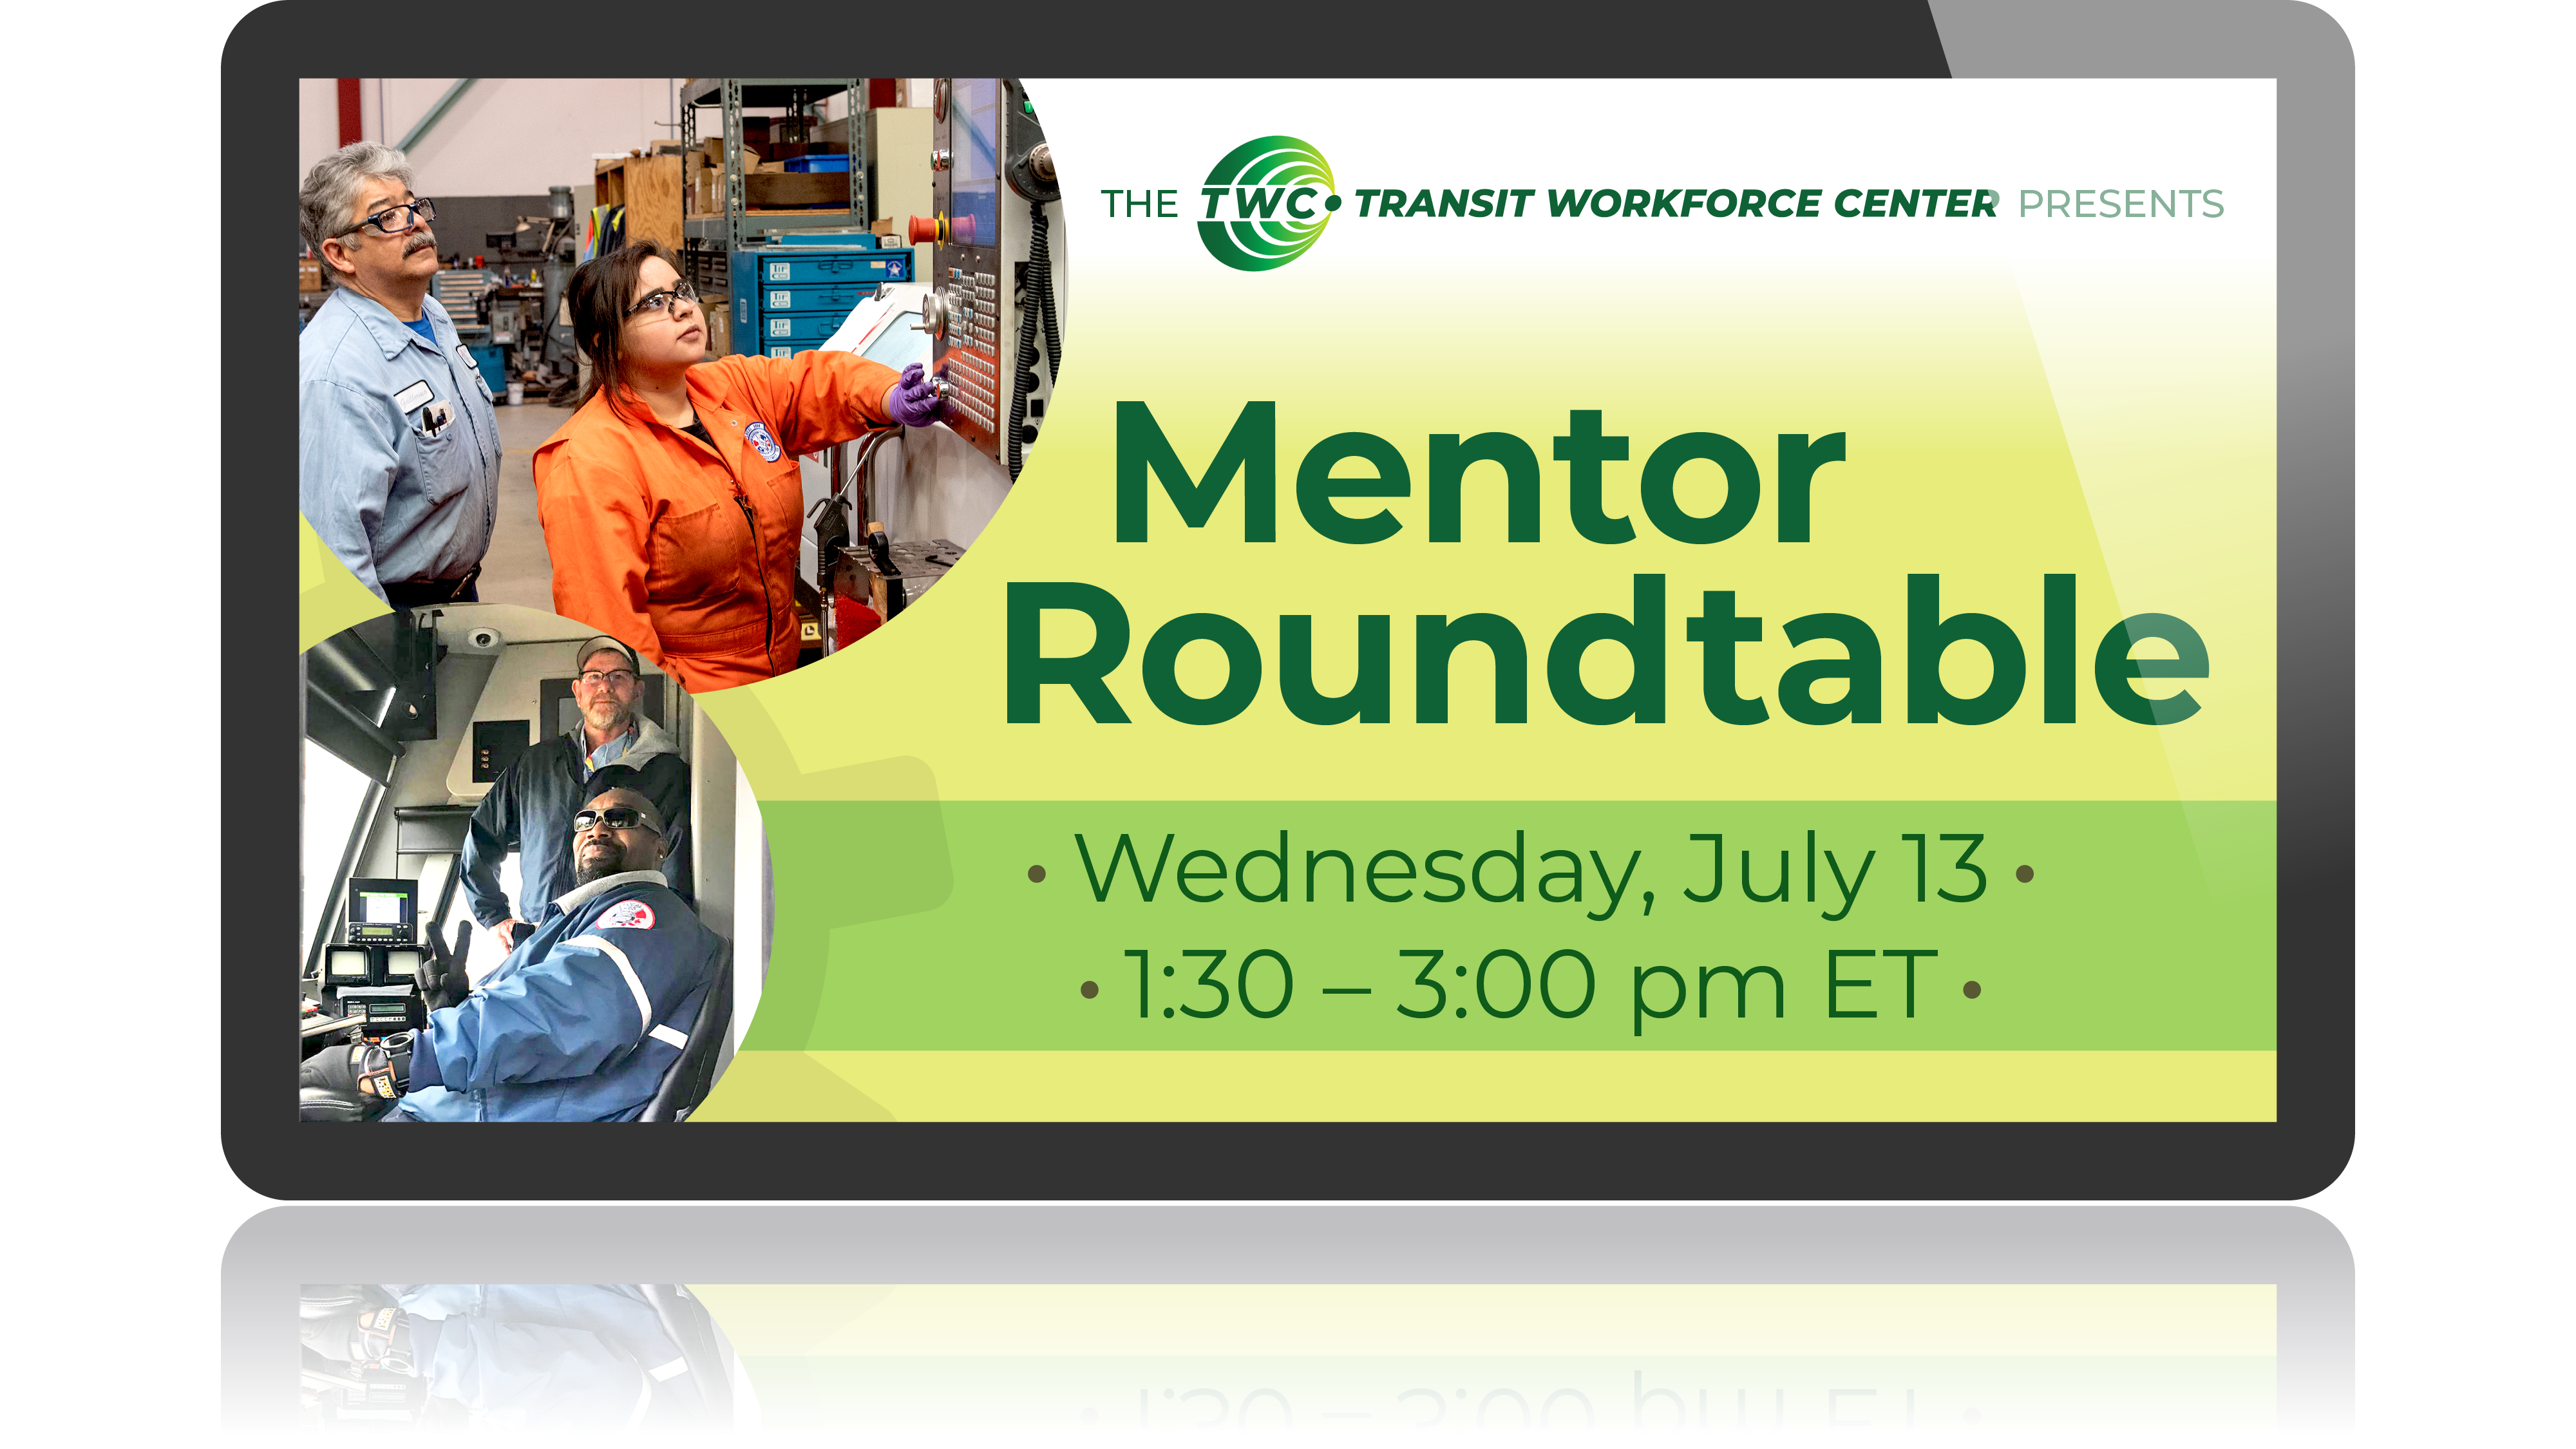 TWC Mentor Roundtable WEDNESDAY, JULY 13 –  1:30 – 3:00 pm ET